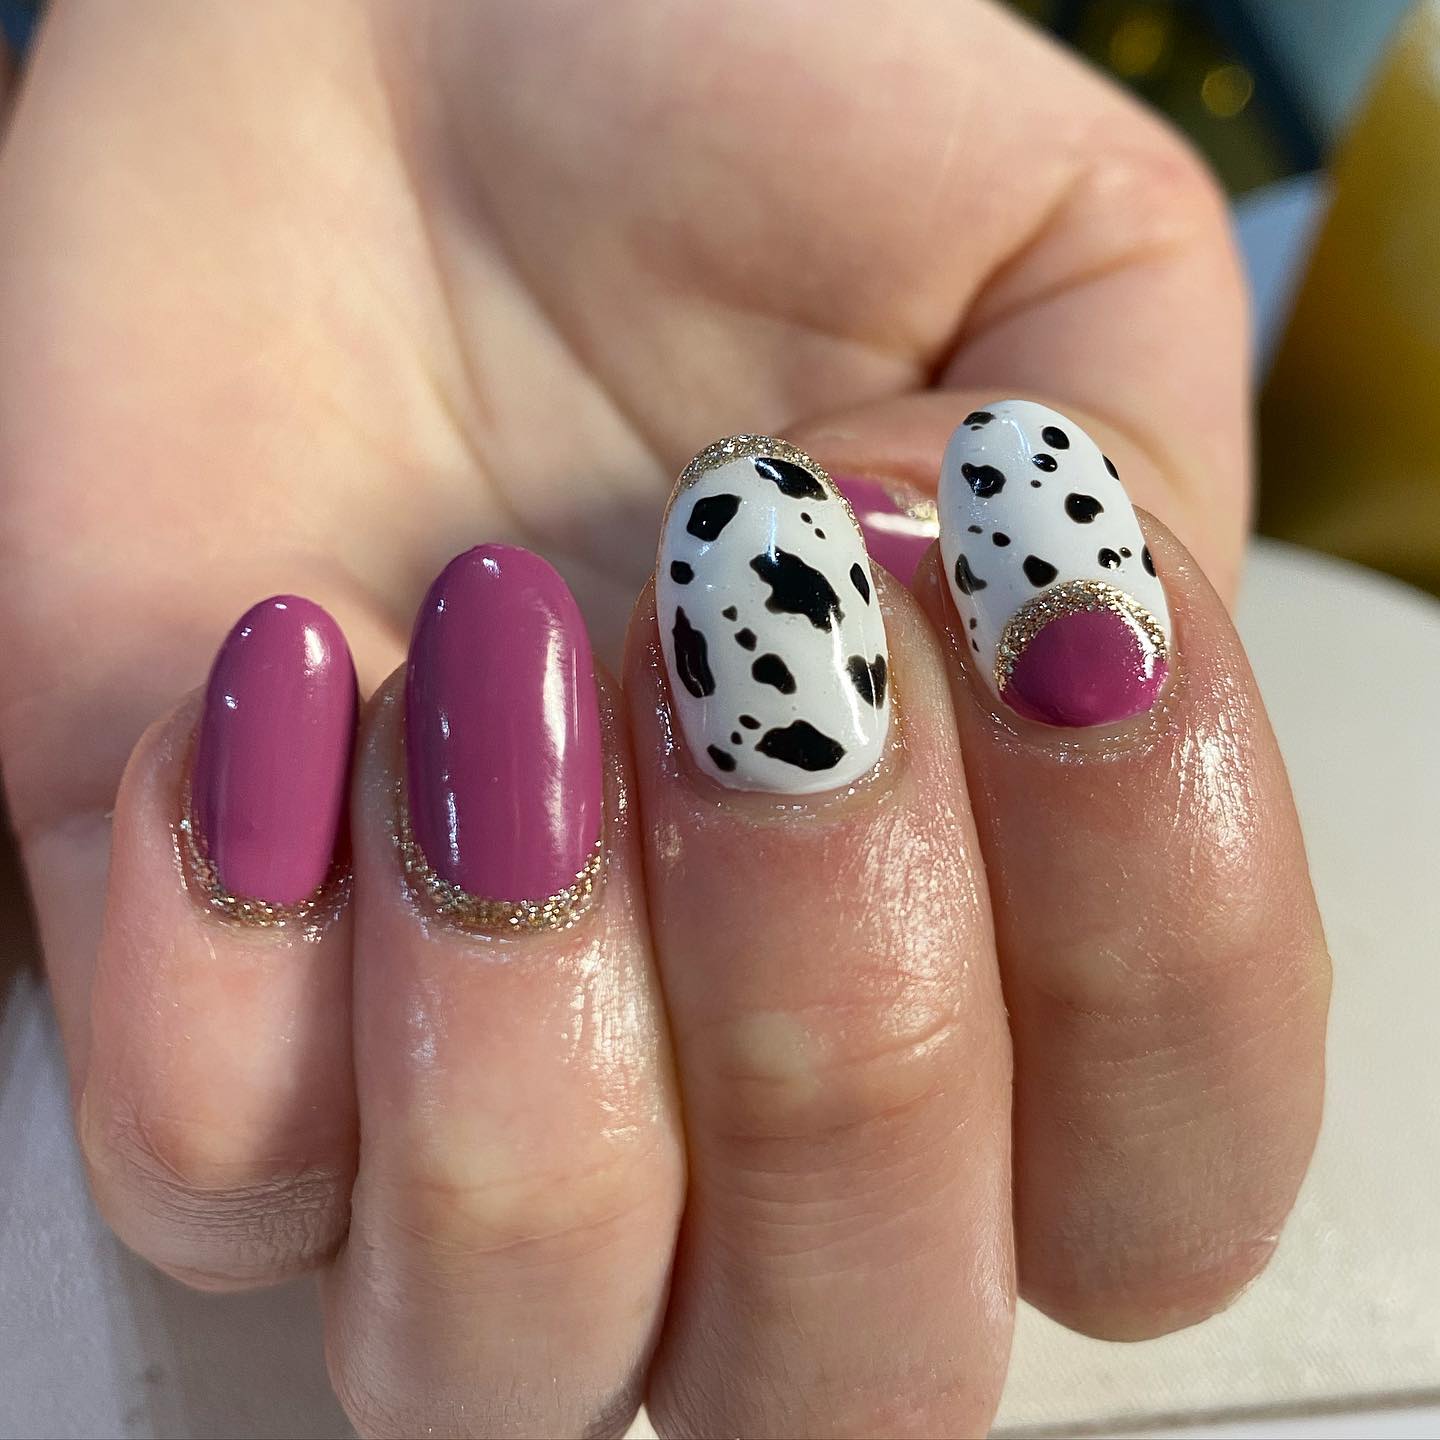 This shade of pink is so adorable! Apply cow prints to your accent nails and add some shiny glitters on them. The combination of pink and cow print is quite tasteful and it creates a great balance between edgy and elegant!